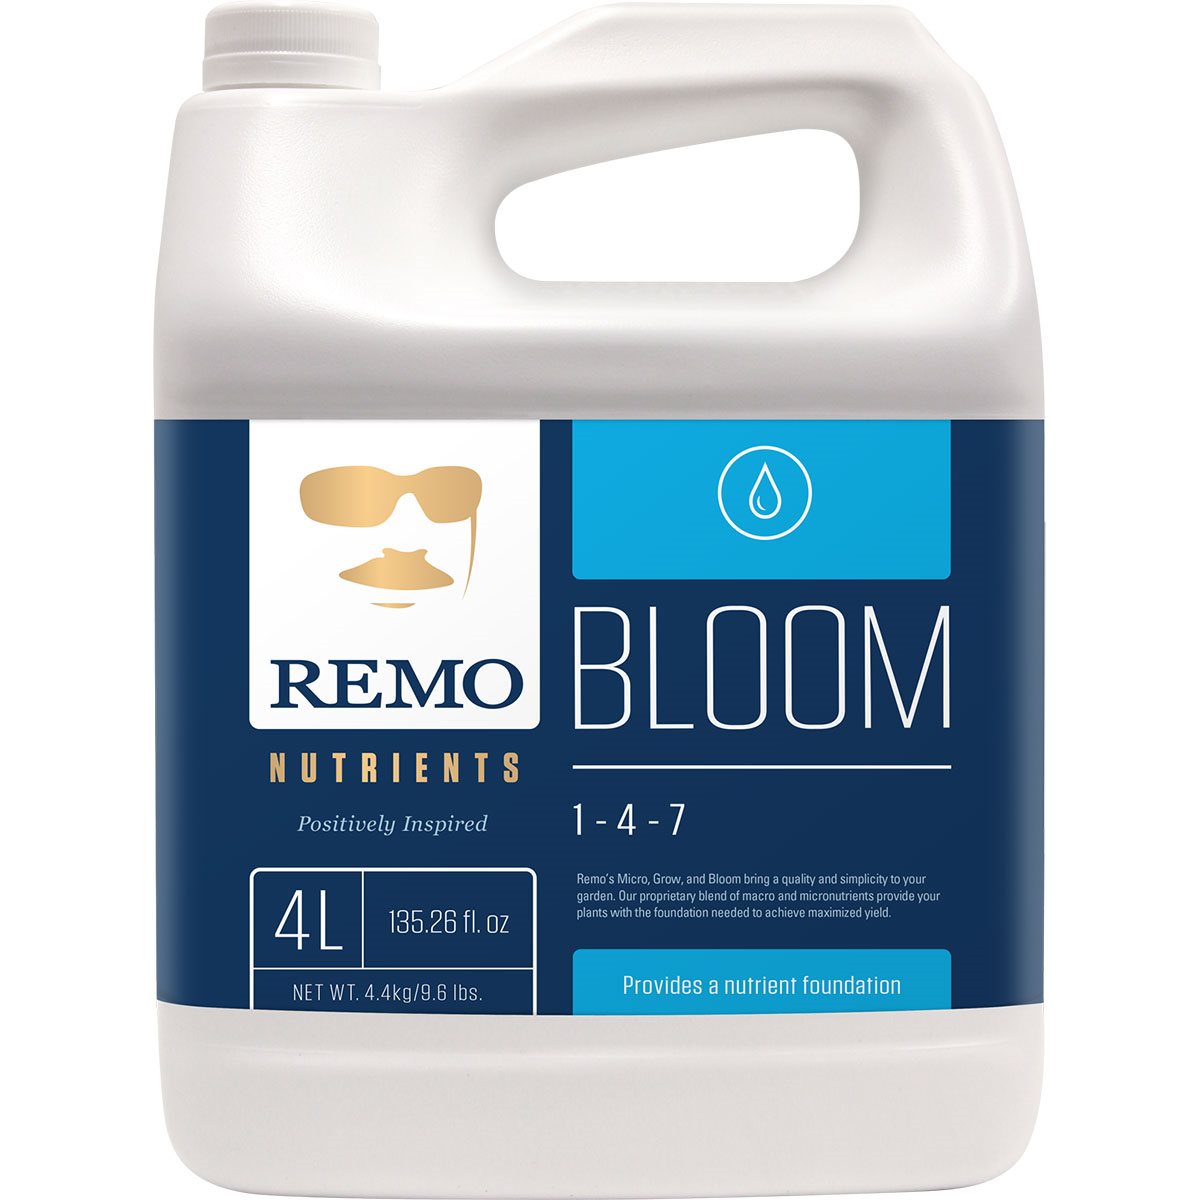 Product Secondary Image:Remo Nutriments Bloom (1-4-7)